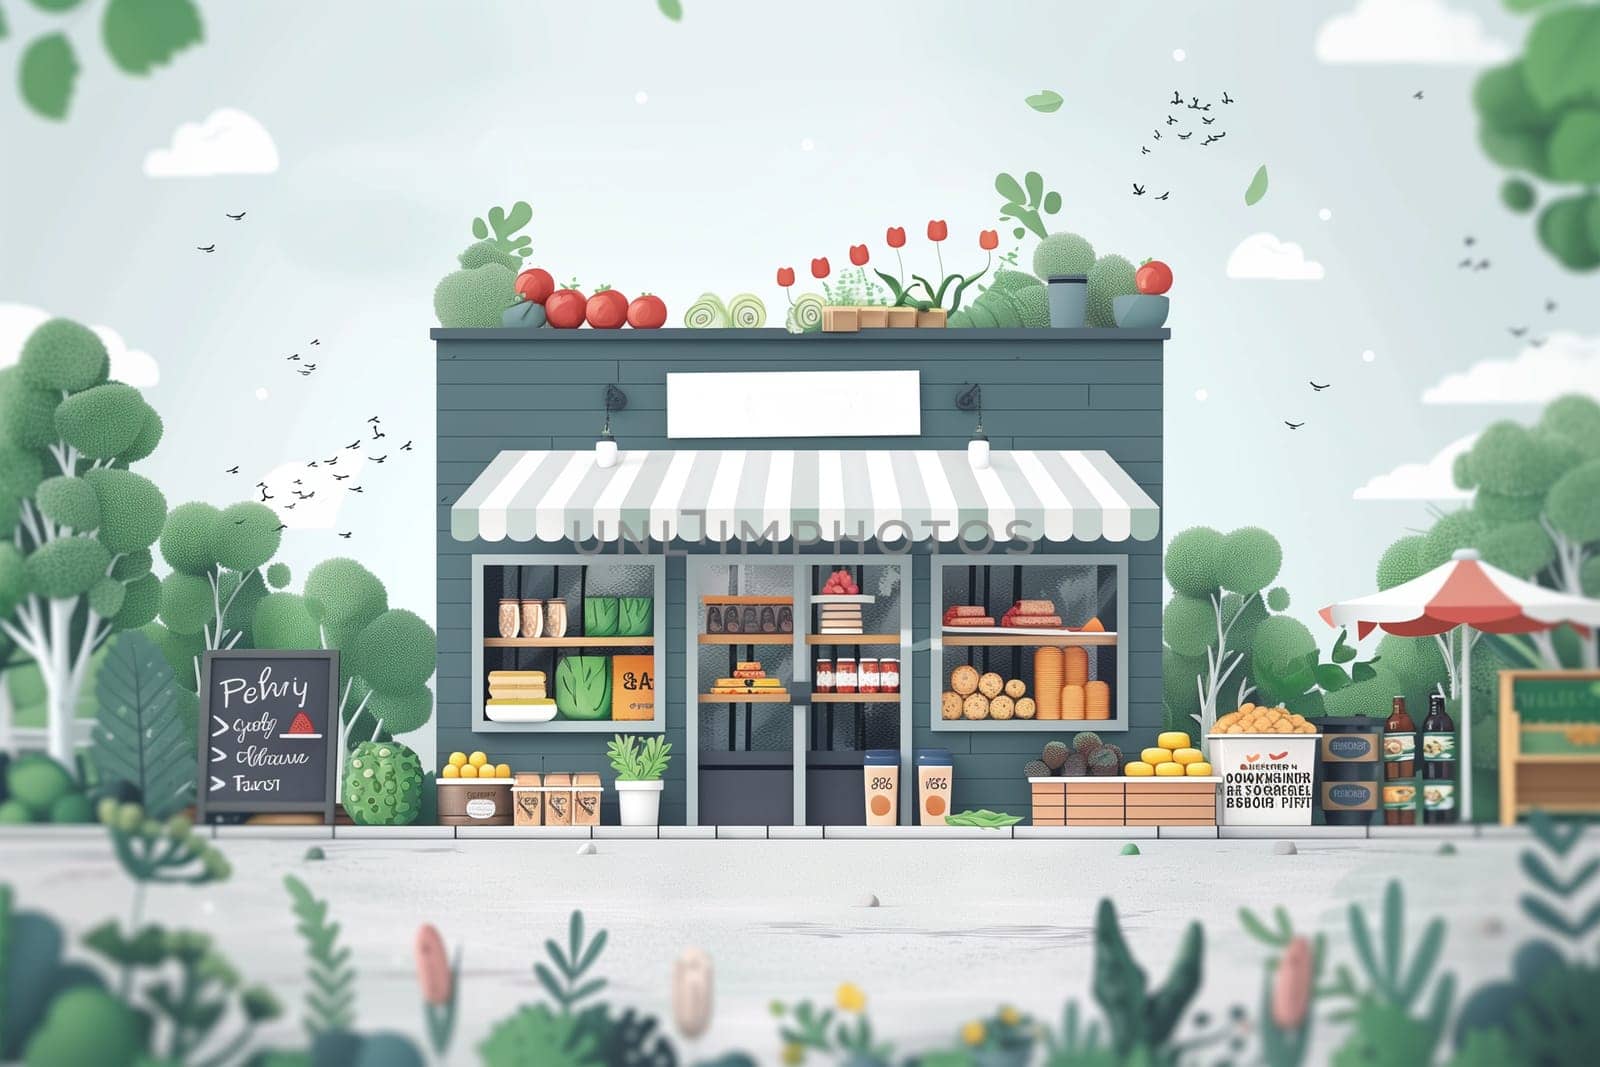 A colorful cartoon illustration of a bustling grocery store with various products on shelves, customers shopping, a cashier at the checkout, and employees restocking items.